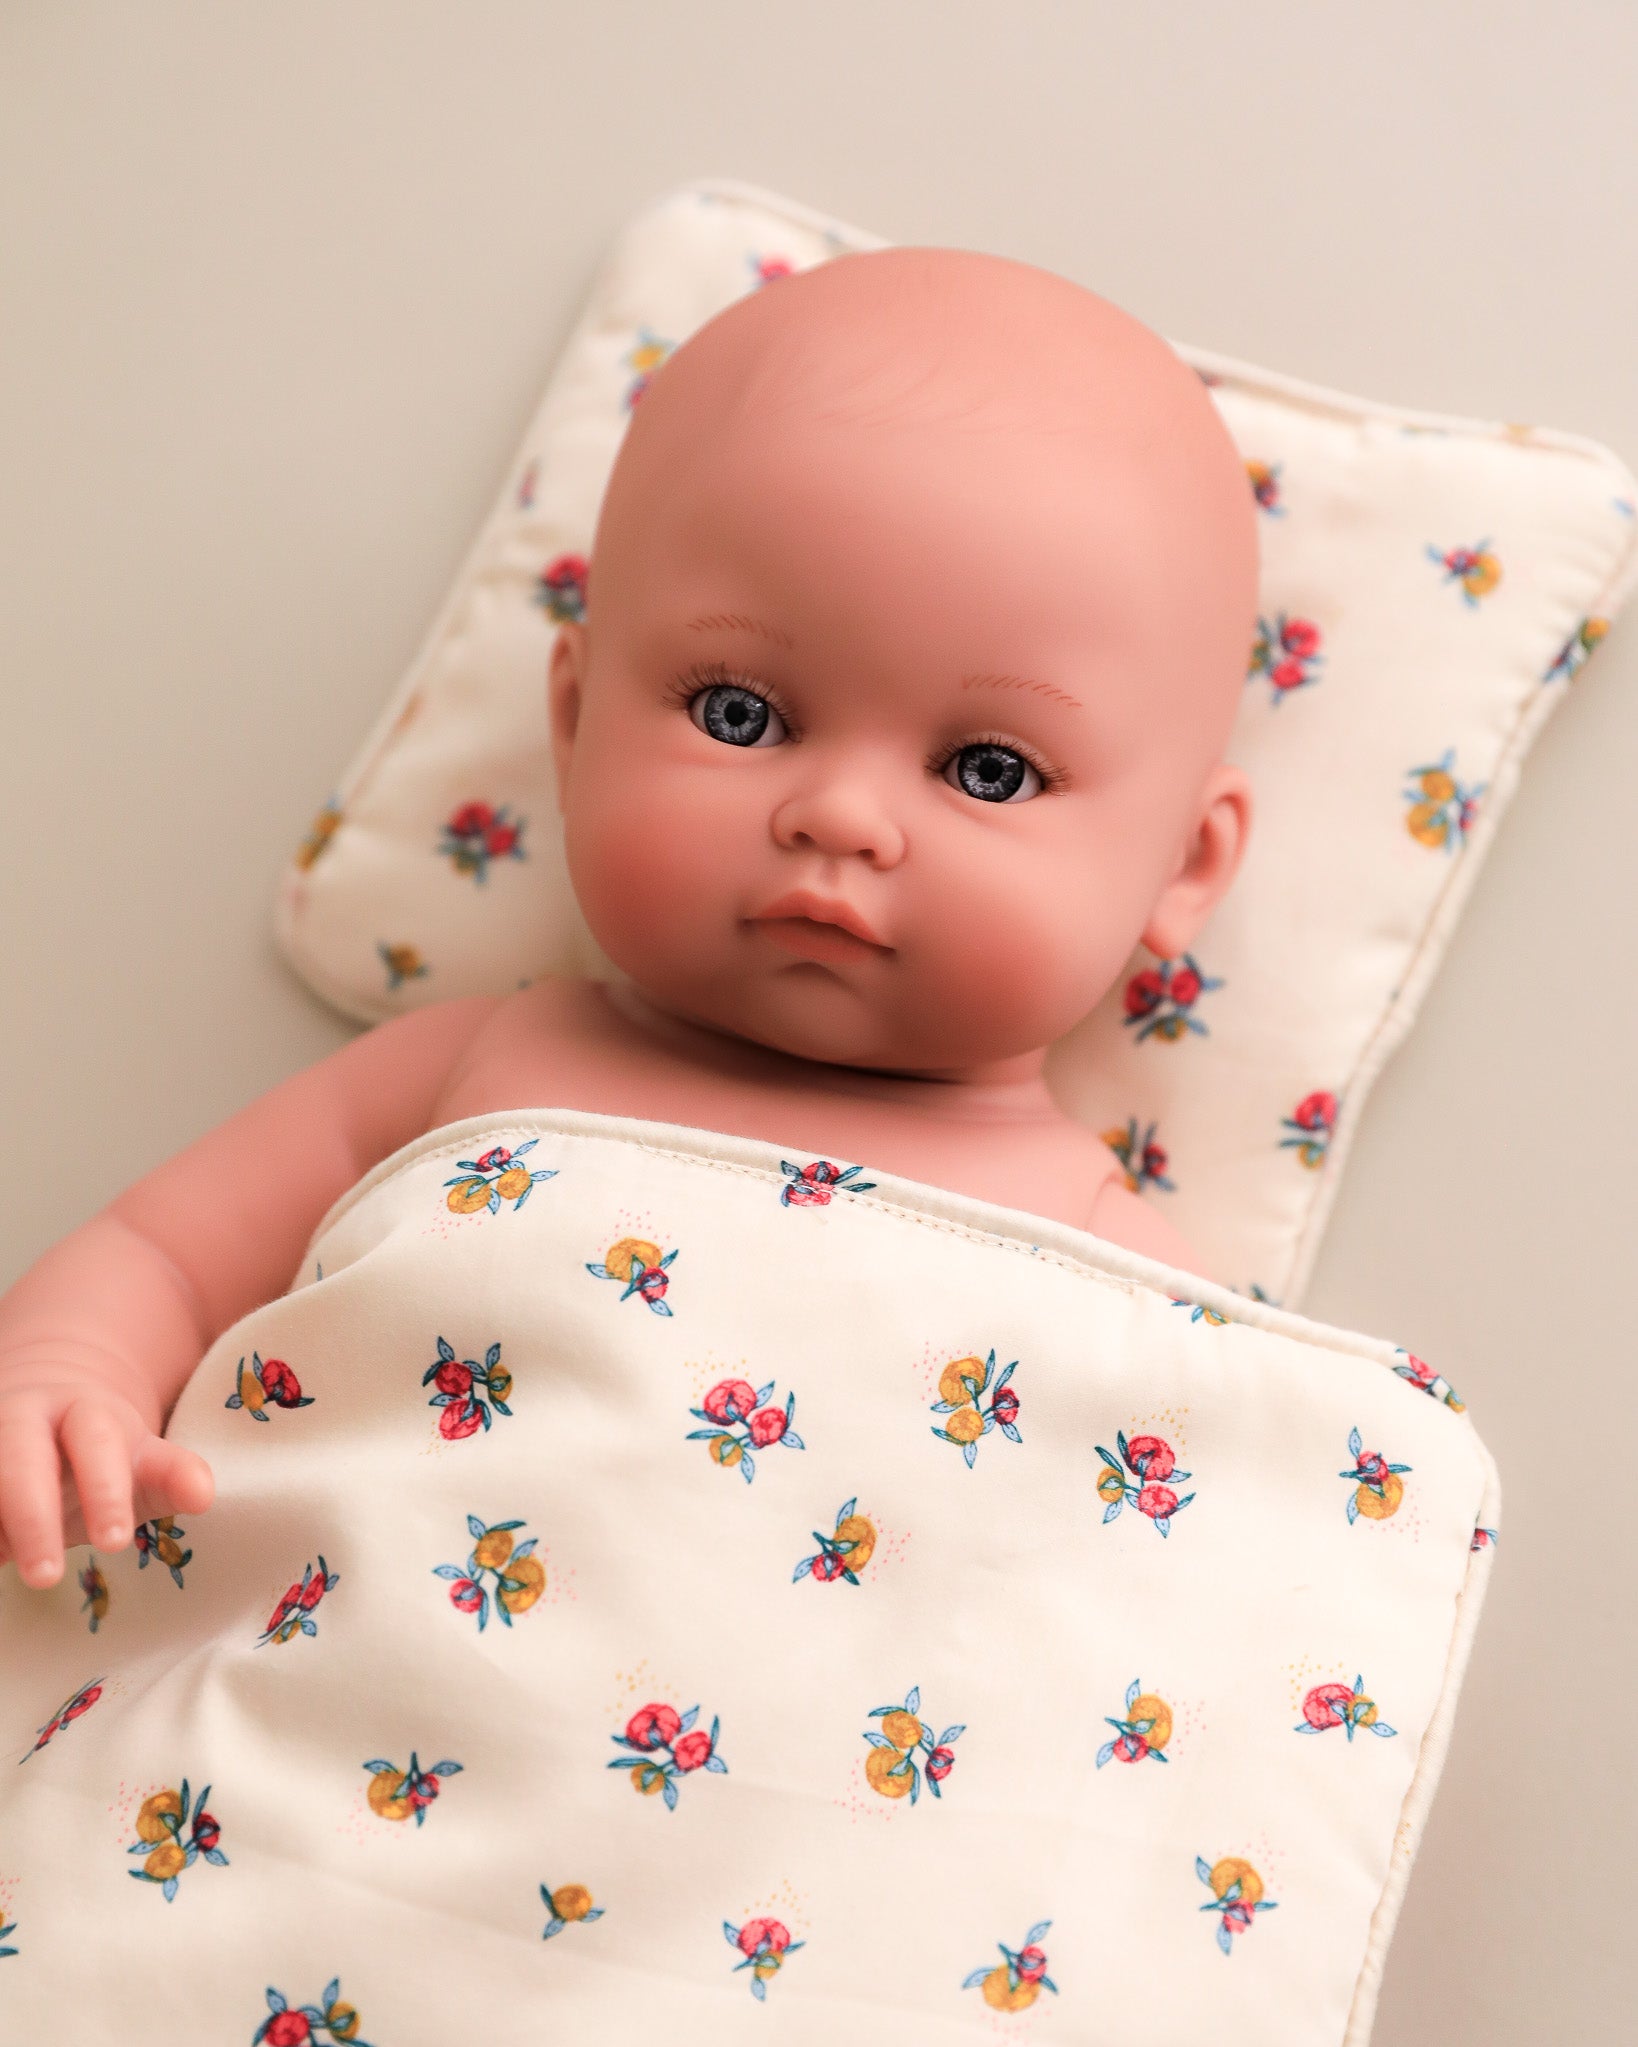 doll bedding, doll bed, doll blanket, doll accessories